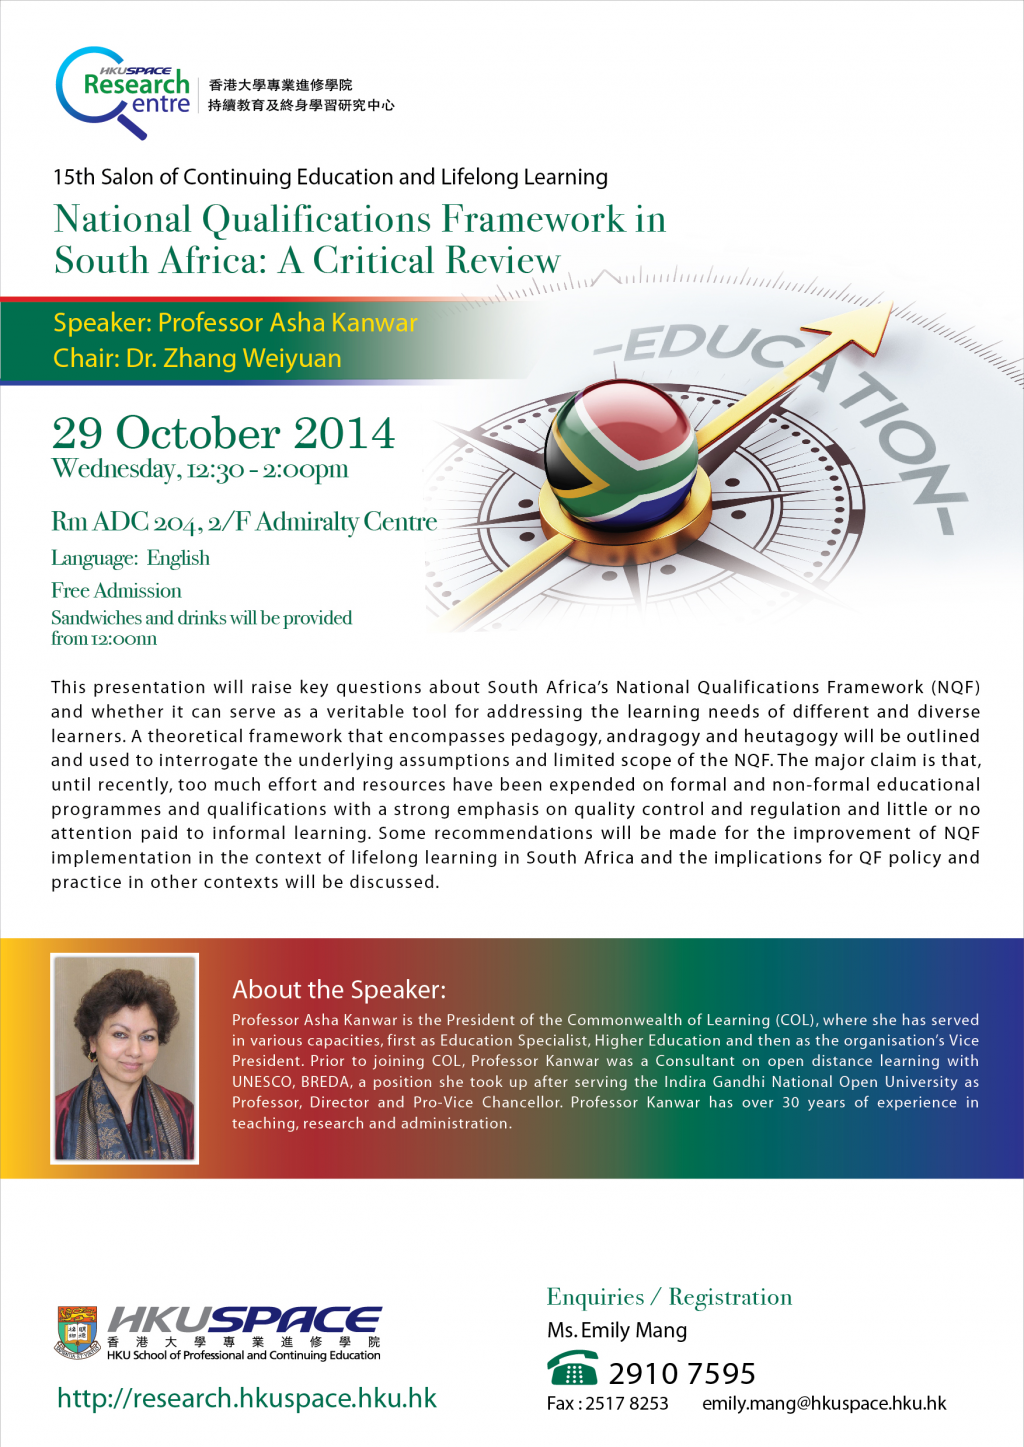 National Qualifications Framework in South Africa: A Critical Review (Free seminar - 29 Oct 2014)